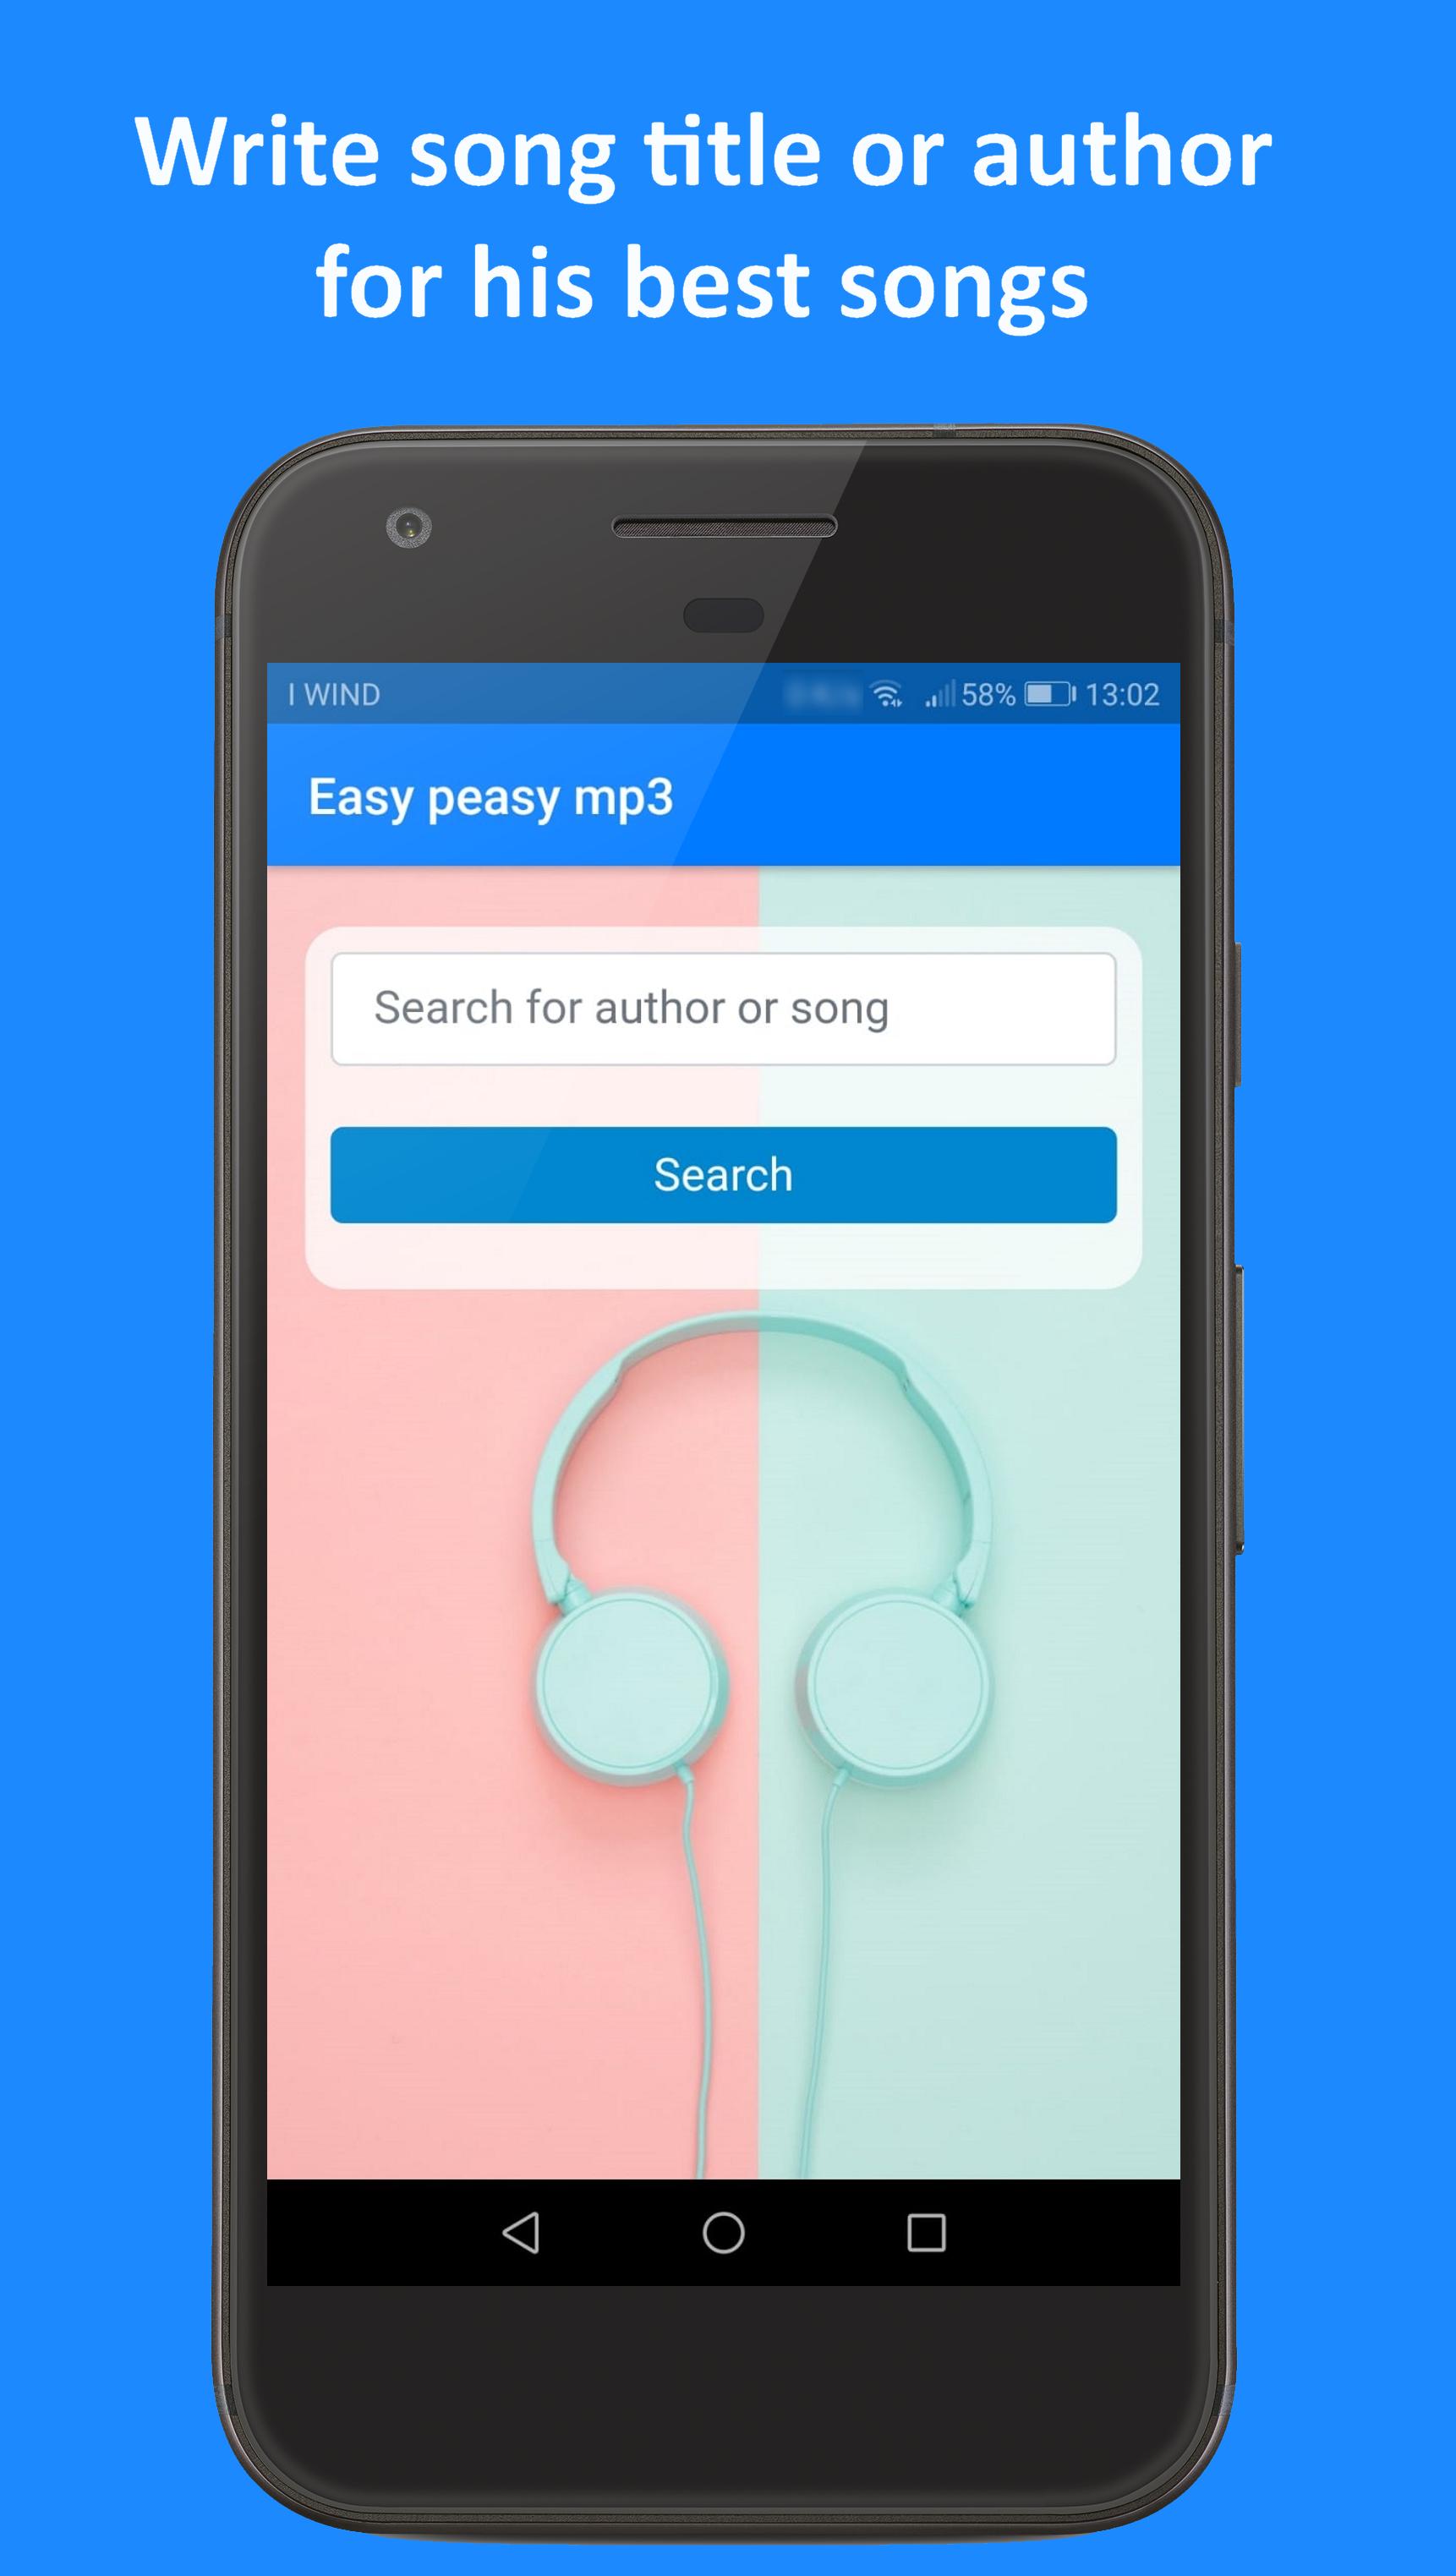 Easy peasy - Download mp3 music for Android - APK Download